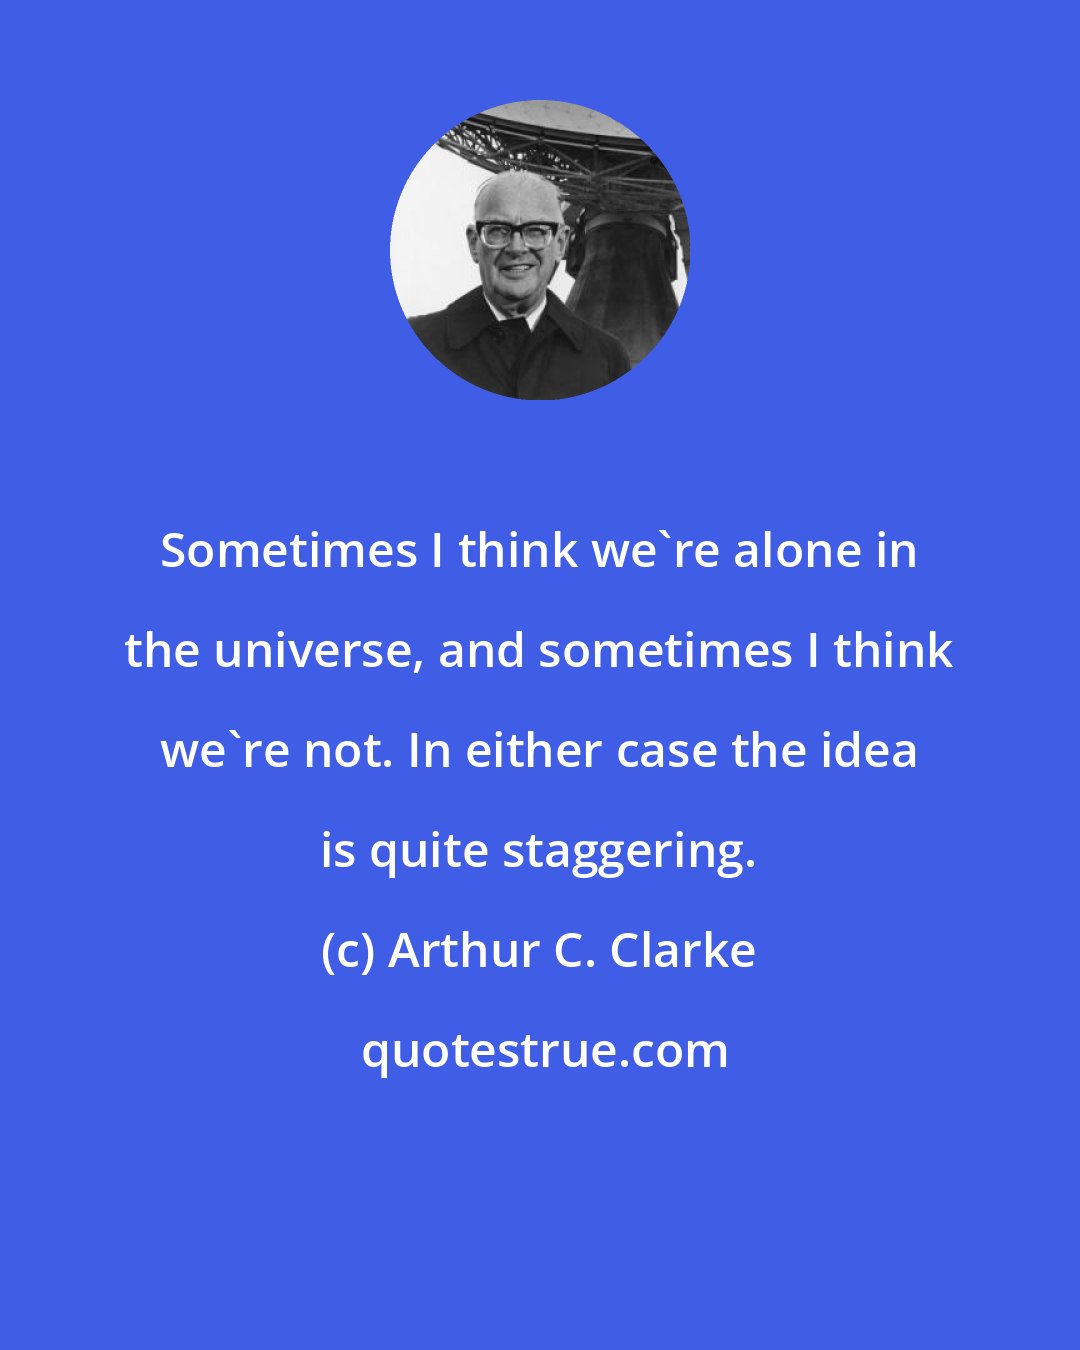 Arthur C. Clarke: Sometimes I think we're alone in the universe, and sometimes I think we're not. In either case the idea is quite staggering.